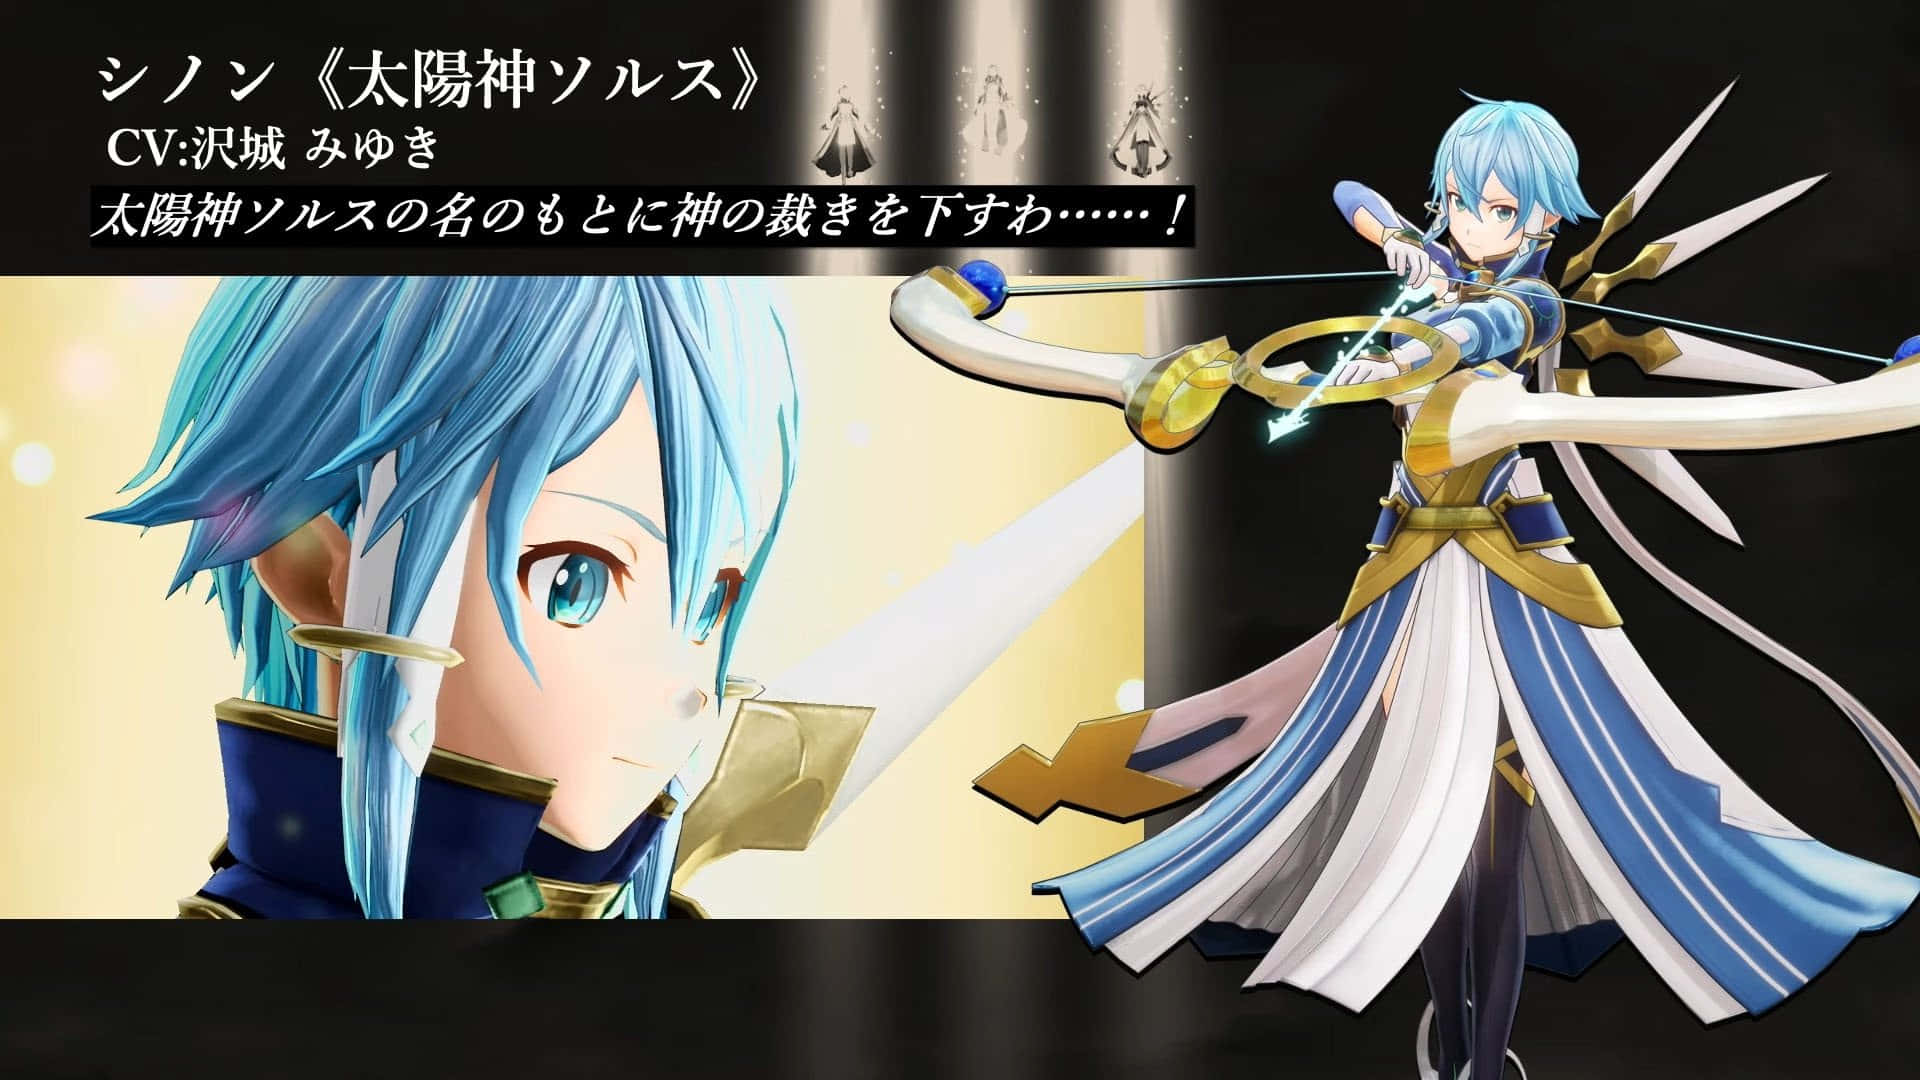 Play your anime game dream with Sword Art Online